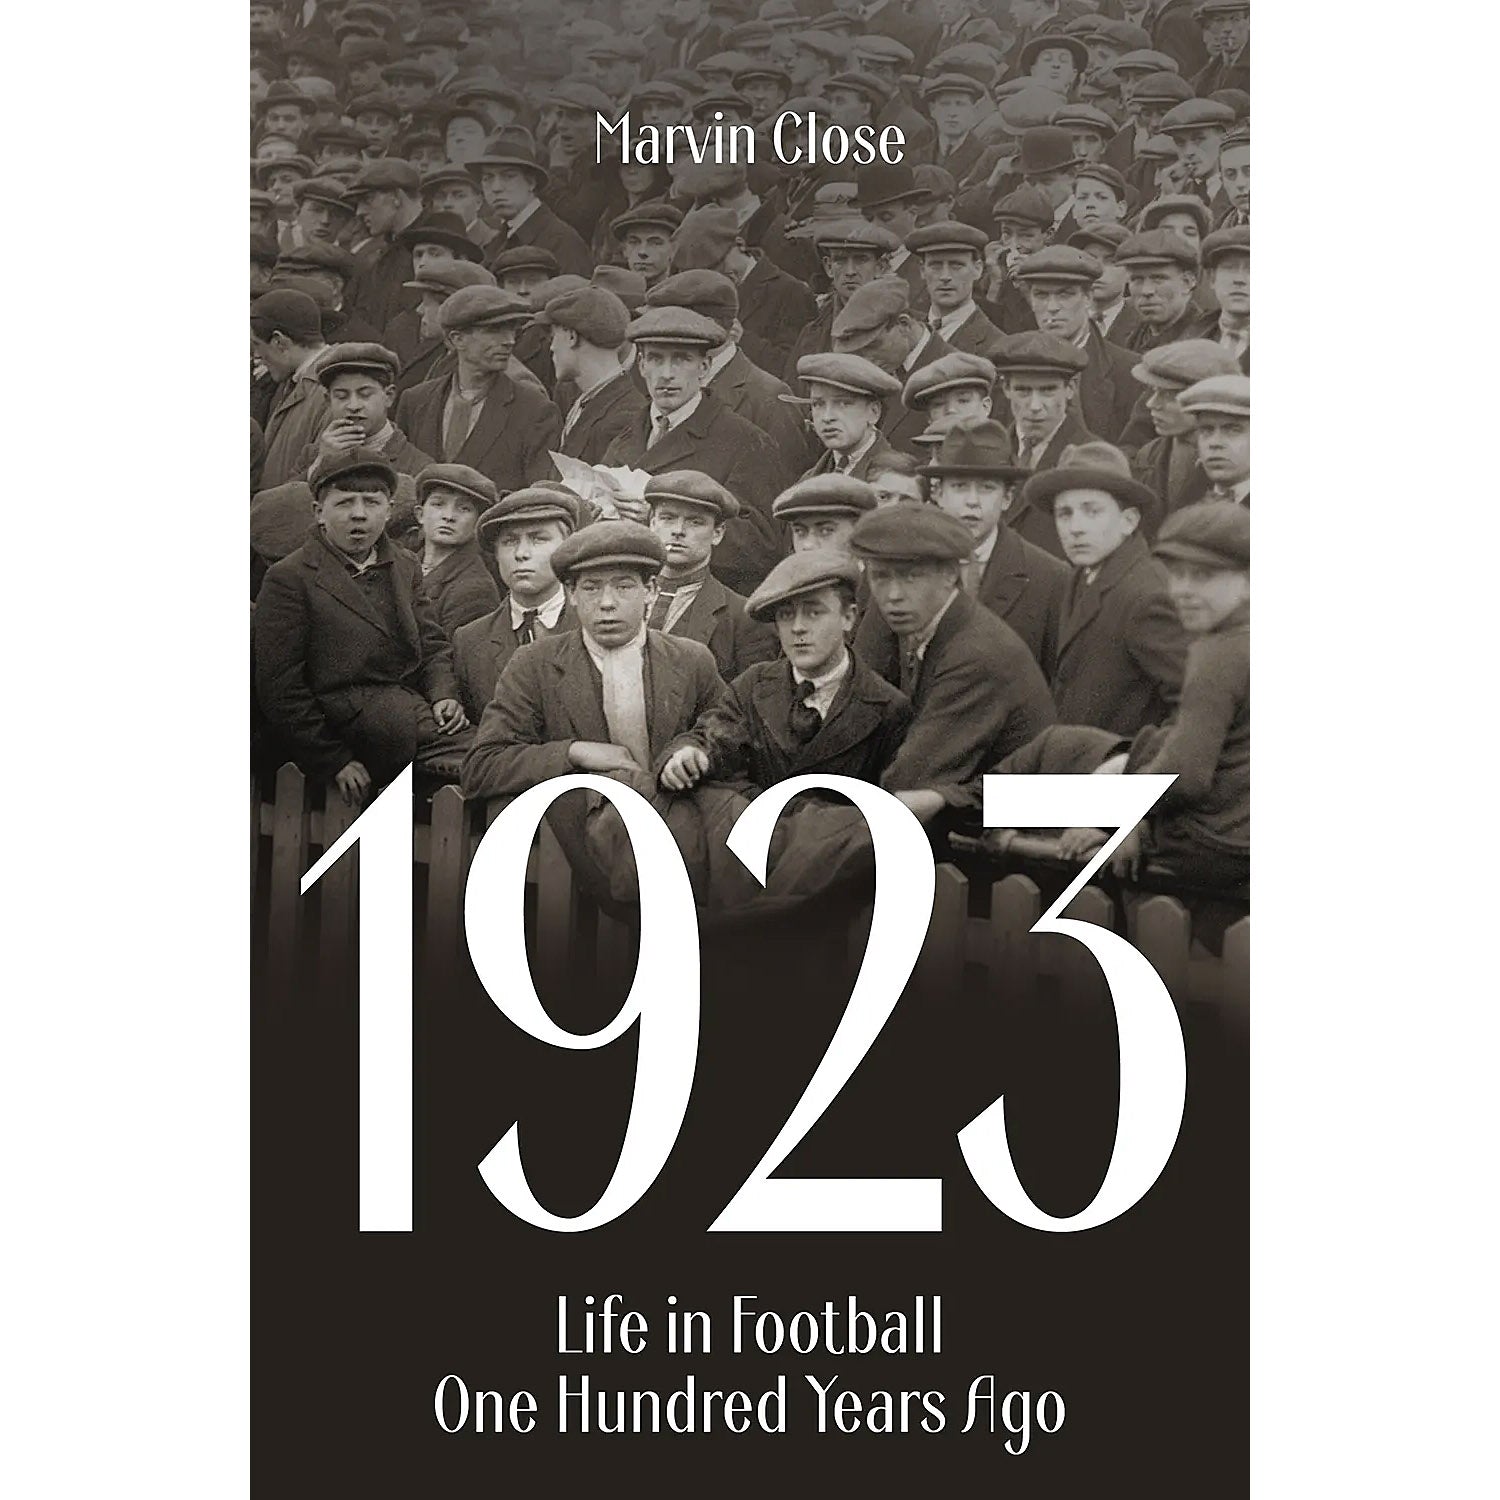 1923 – Life in Football One Hundred Years Ago